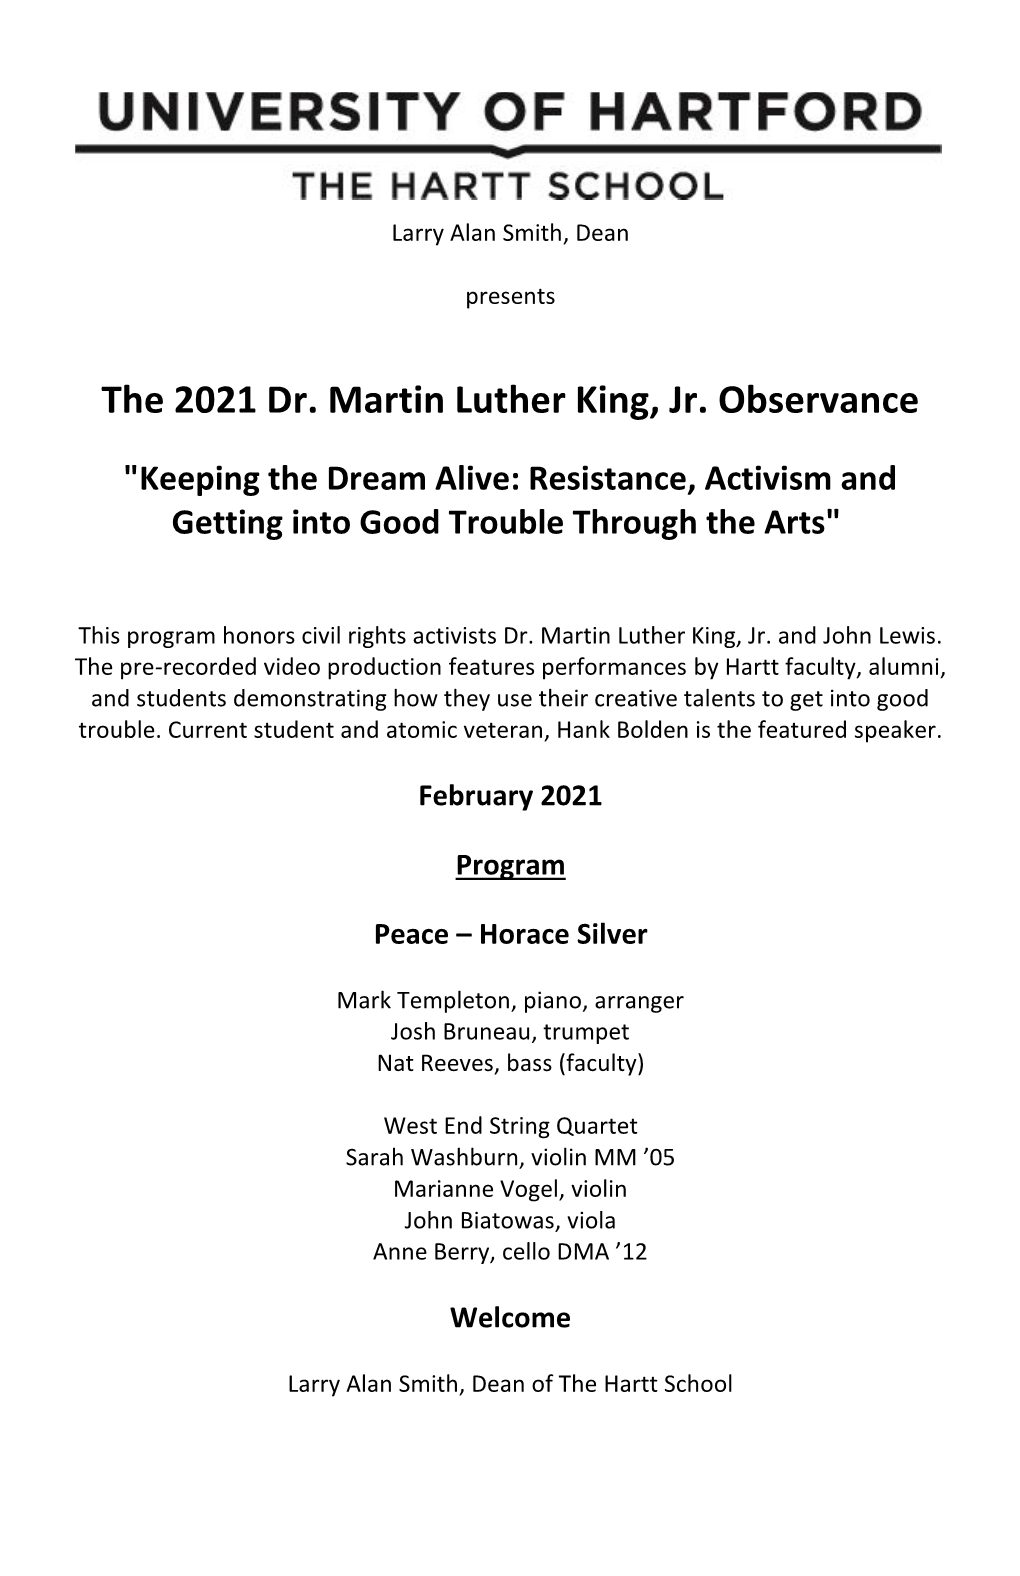 The 2021 Dr. Martin Luther King, Jr. Observance